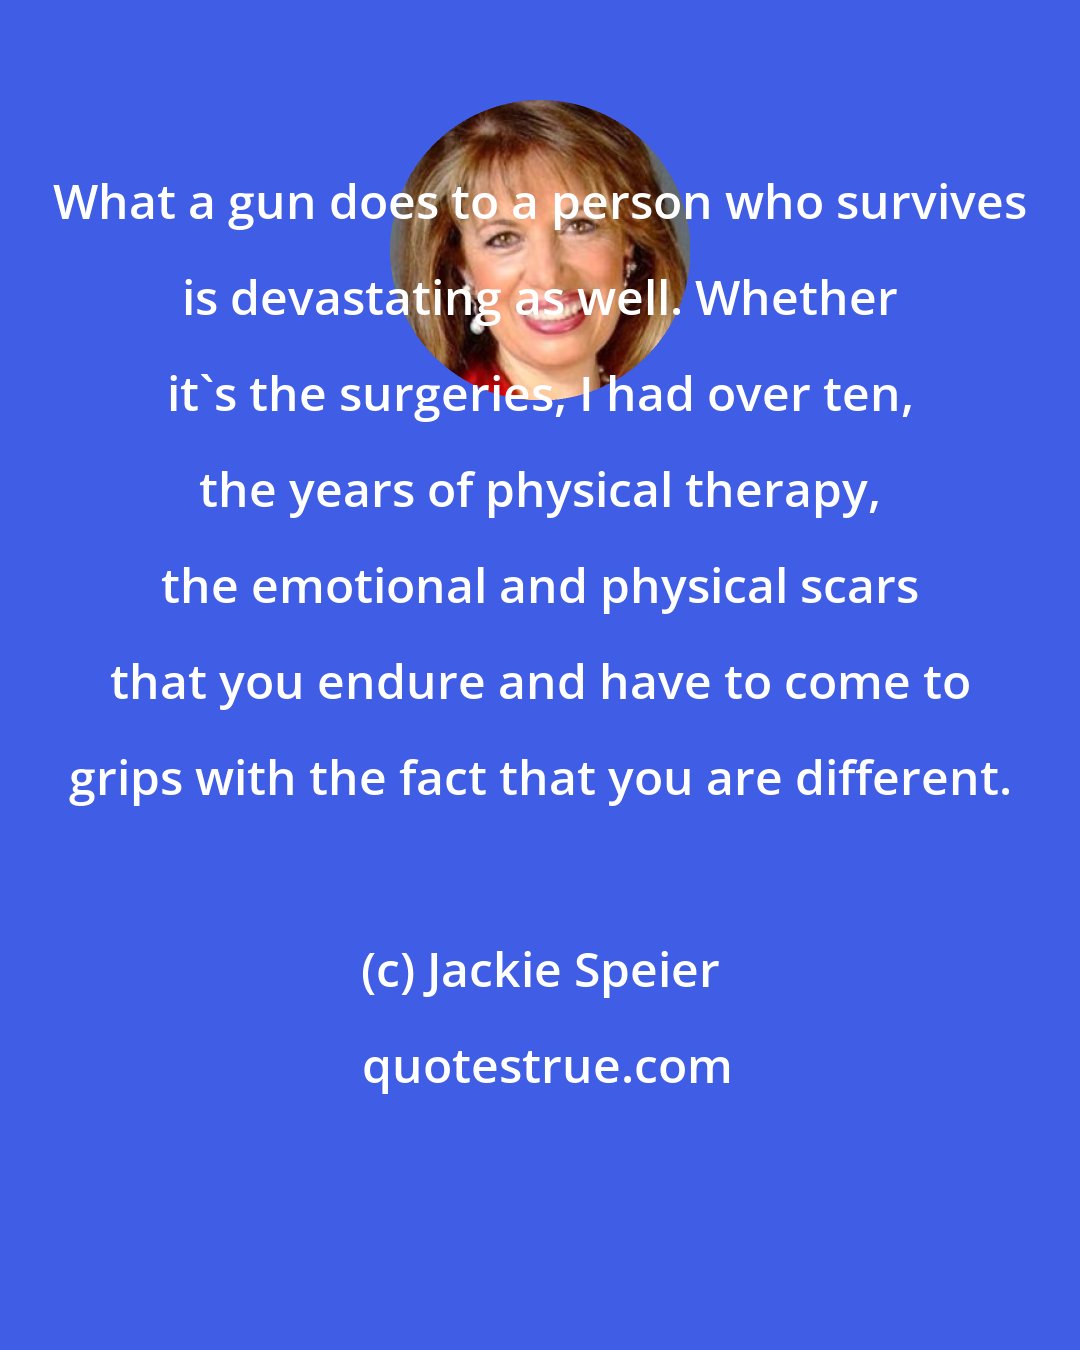 Jackie Speier: What a gun does to a person who survives is devastating as well. Whether it`s the surgeries, I had over ten, the years of physical therapy, the emotional and physical scars that you endure and have to come to grips with the fact that you are different.